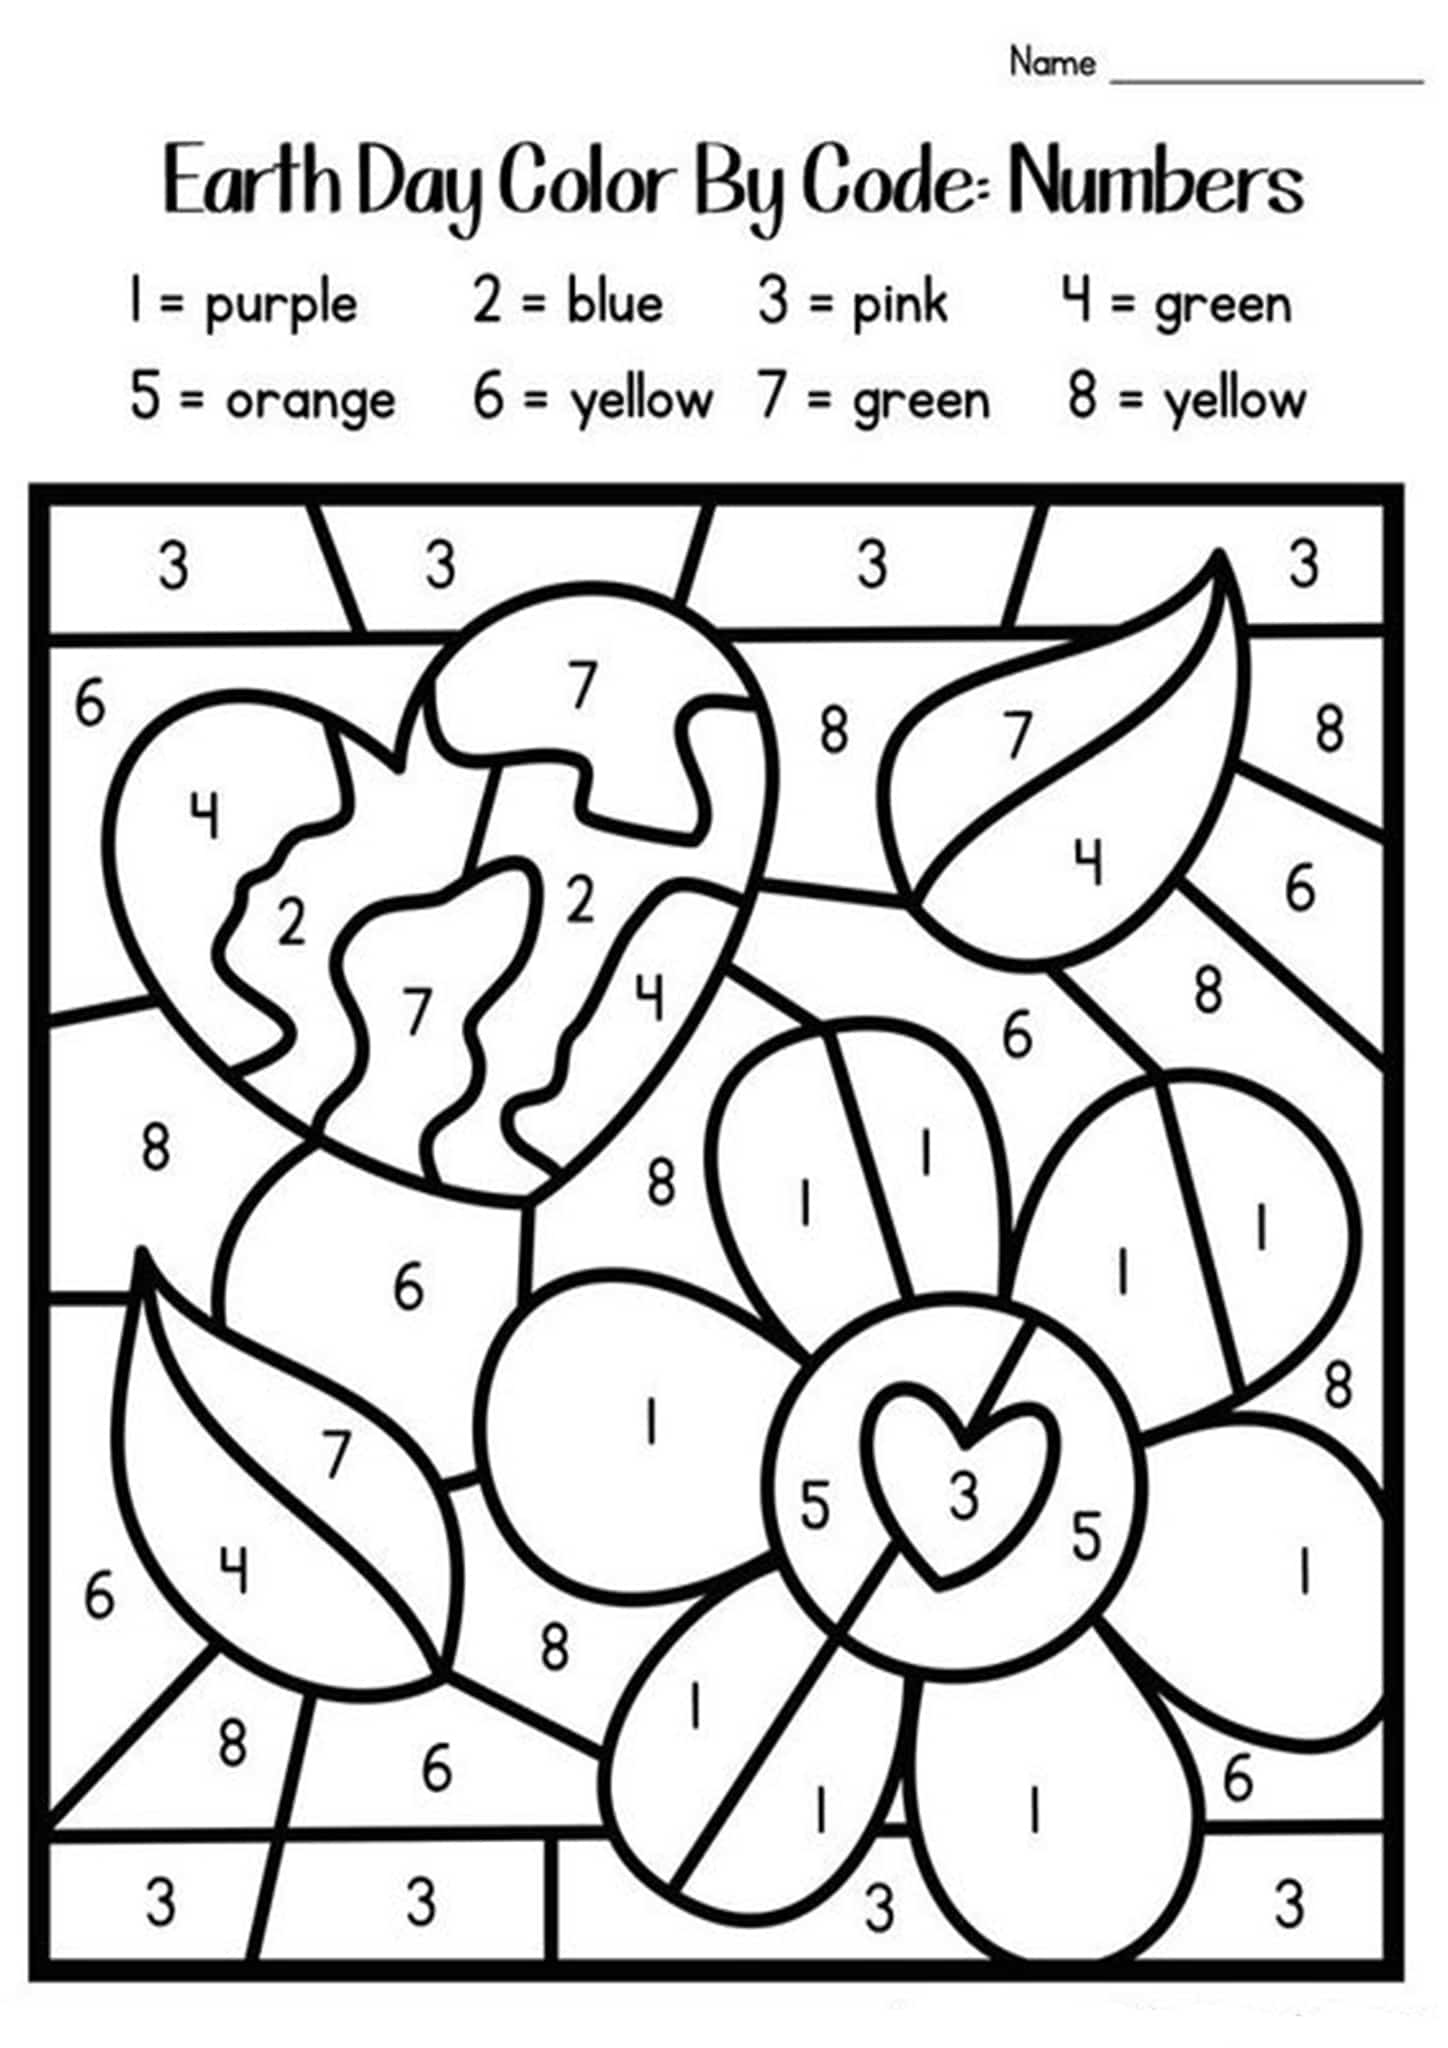 Easy Color By Number Online Coloring Worksheets Are A Great Way To Develop We Also Have Animal